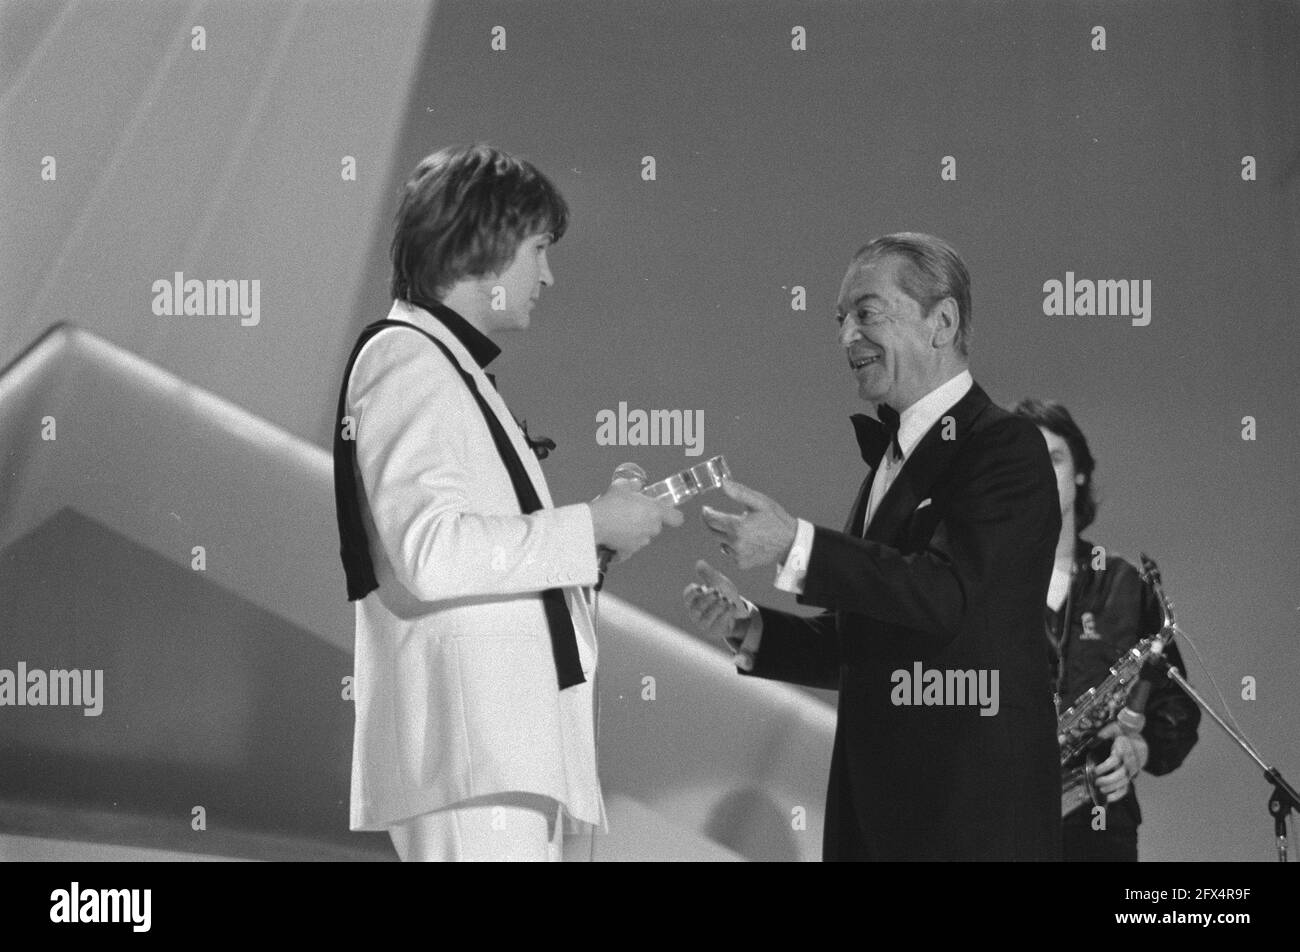 Eurovision Song Contest 1980 ( The Hague ); winner Johnny Logan receives  award, April 19, 1980, Winners, awards, song contests, The Netherlands,  20th century press agency photo, news to remember, documentary, historic